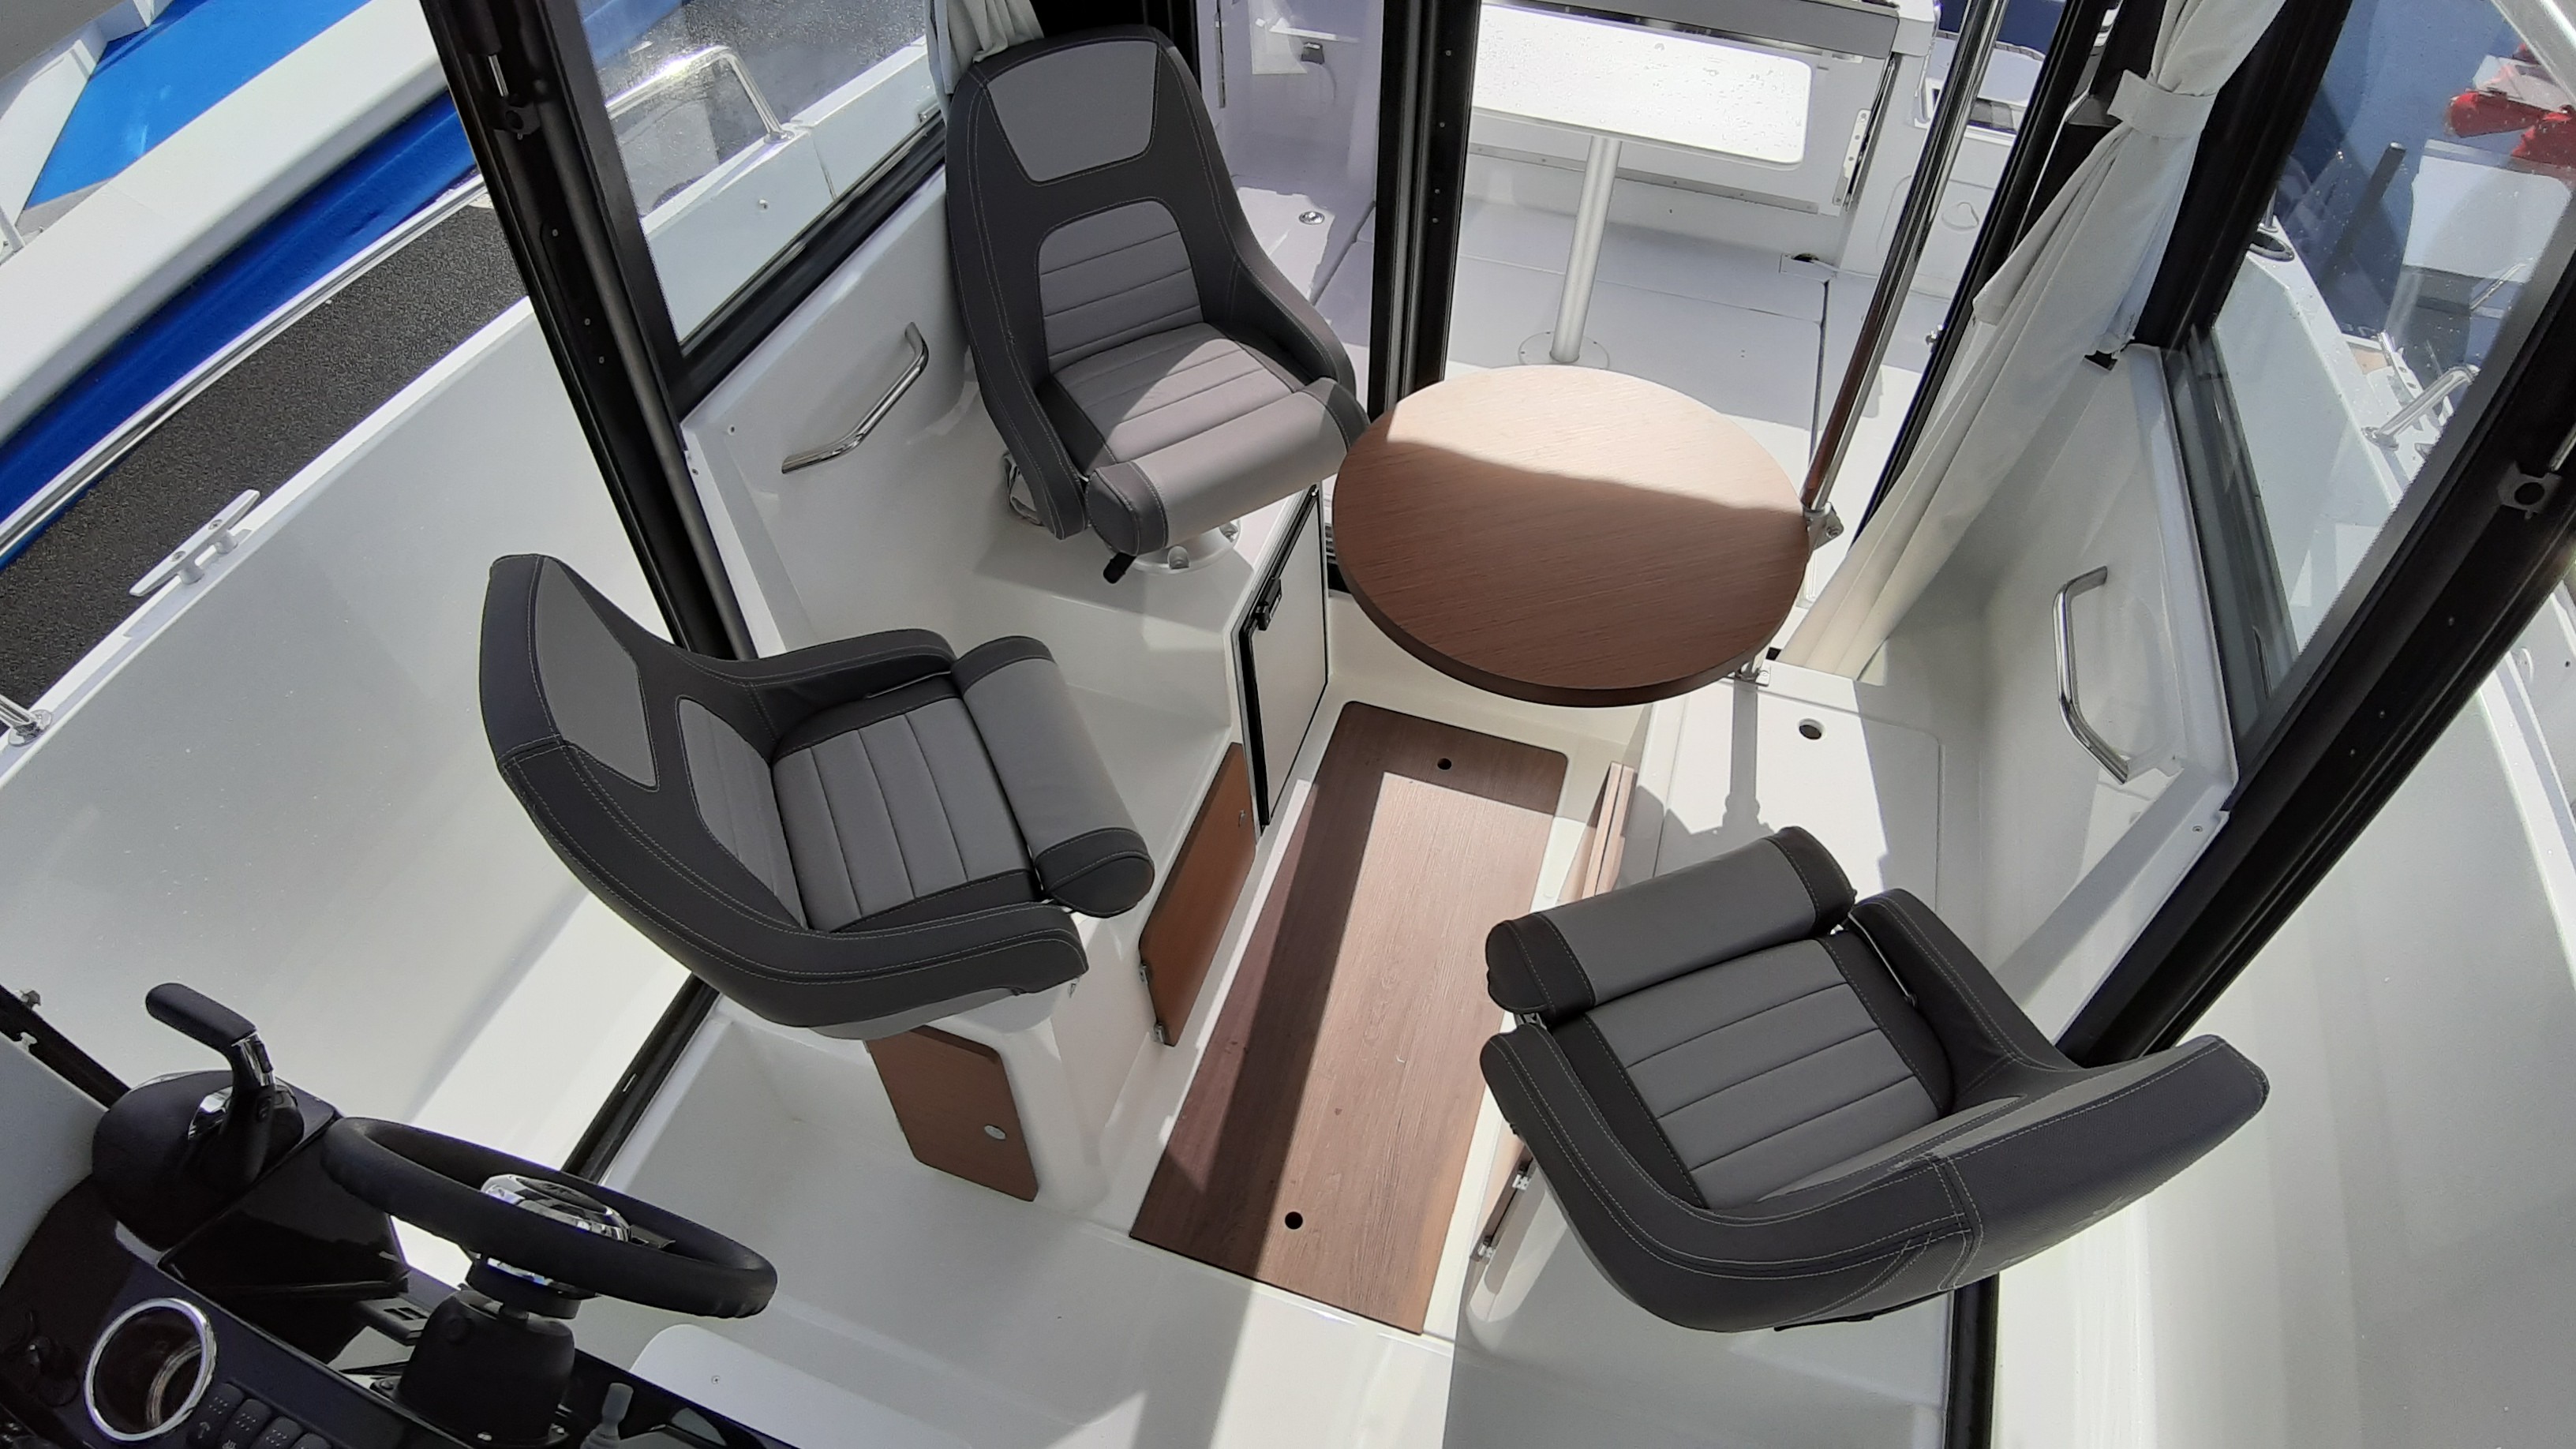 Swivel chairs in Merry Fisher 795 Sport S2